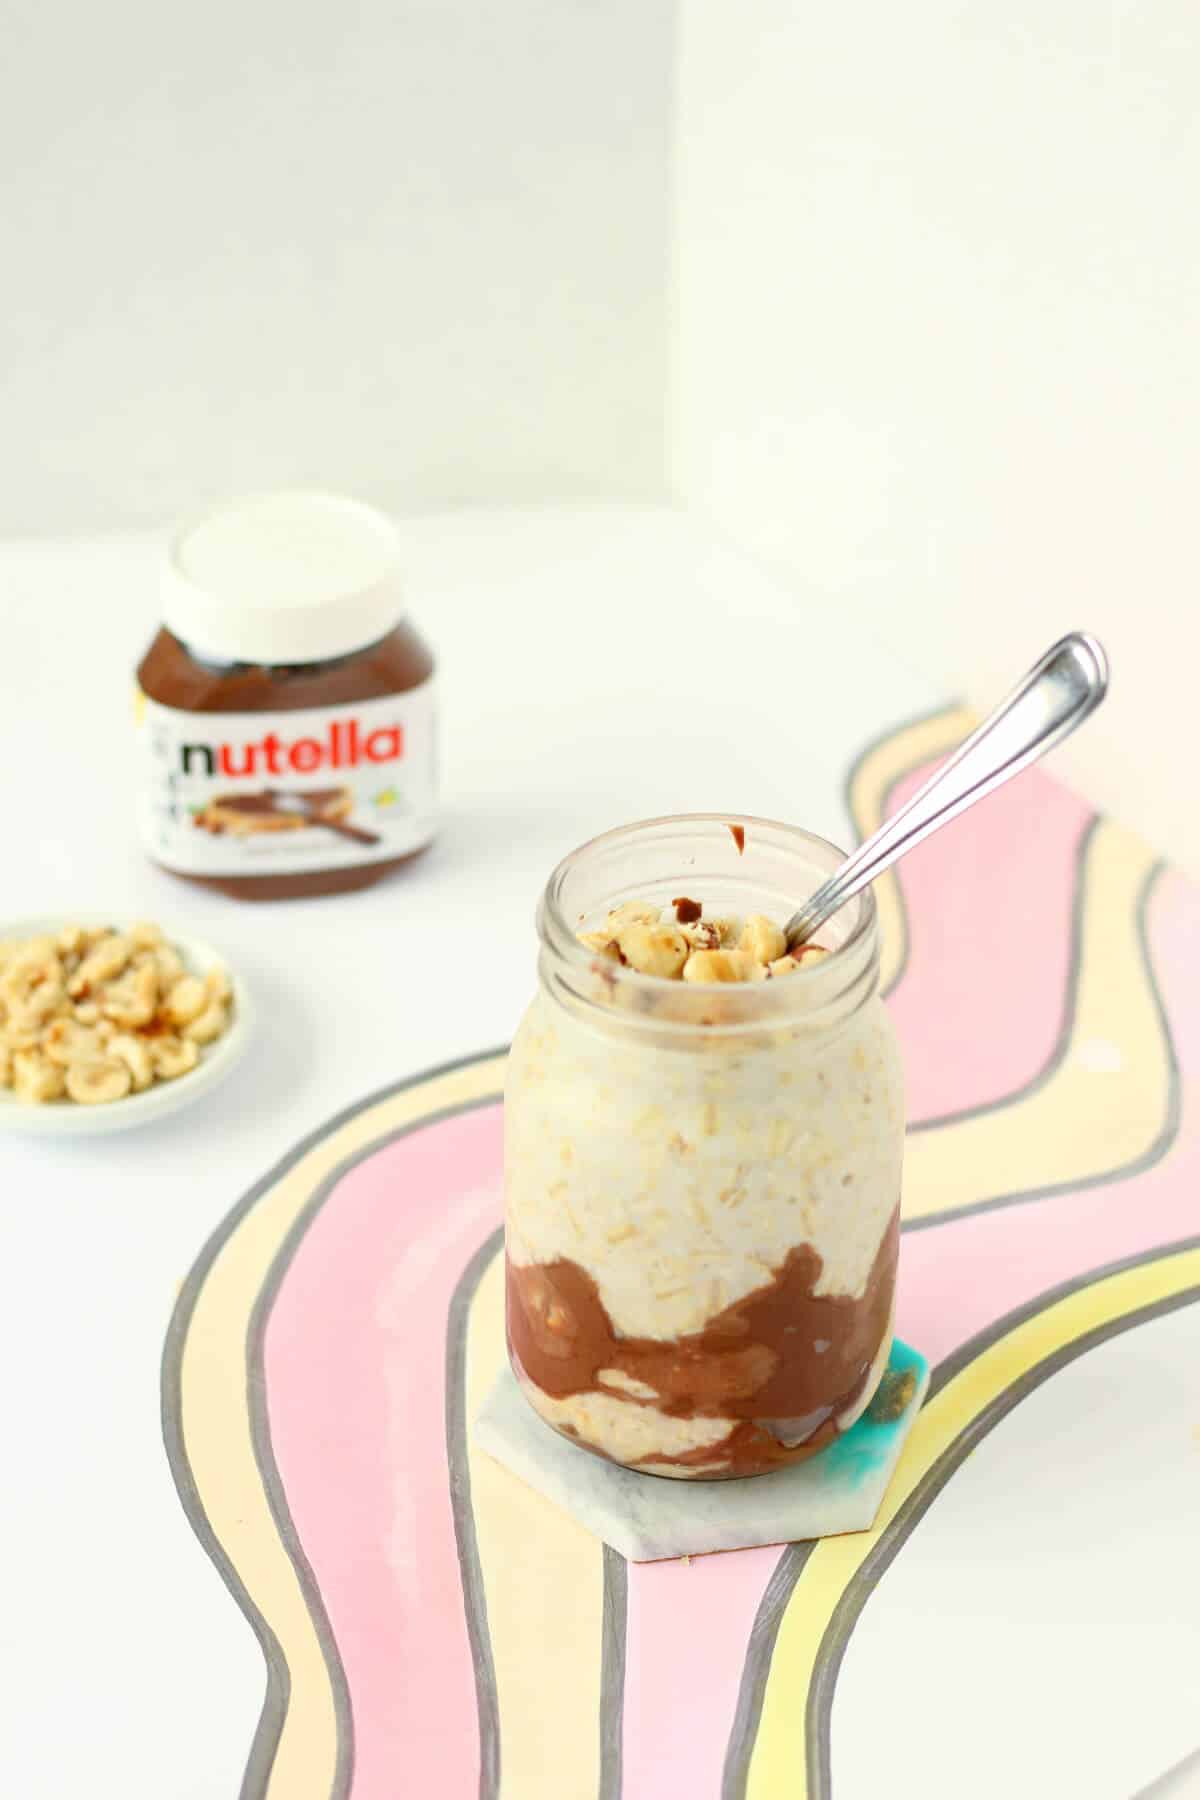 A clear glass jar with Nutella smeared on the inside with cream-colored overnight oats and topped with chopped hazelnuts. There's a spoon sticking out of the jar, with a bowl of hazelnuts and a jar of Nutella in the background.